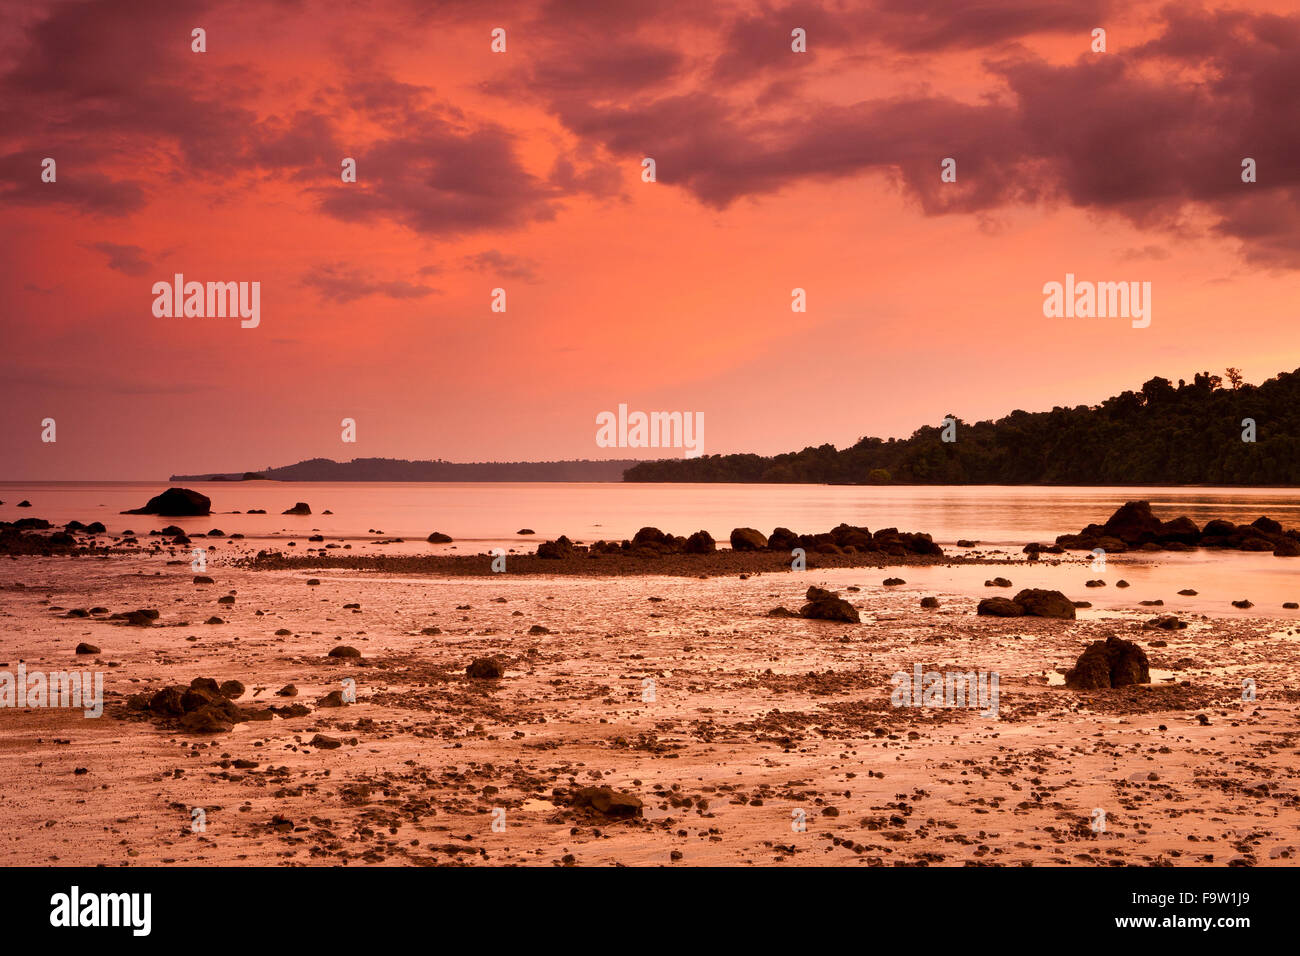 Evening skies at the northeast side of Coiba island national park, UNESCO heritage site, Pacific coast, Veraguas province, Republic of Panama. Stock Photo